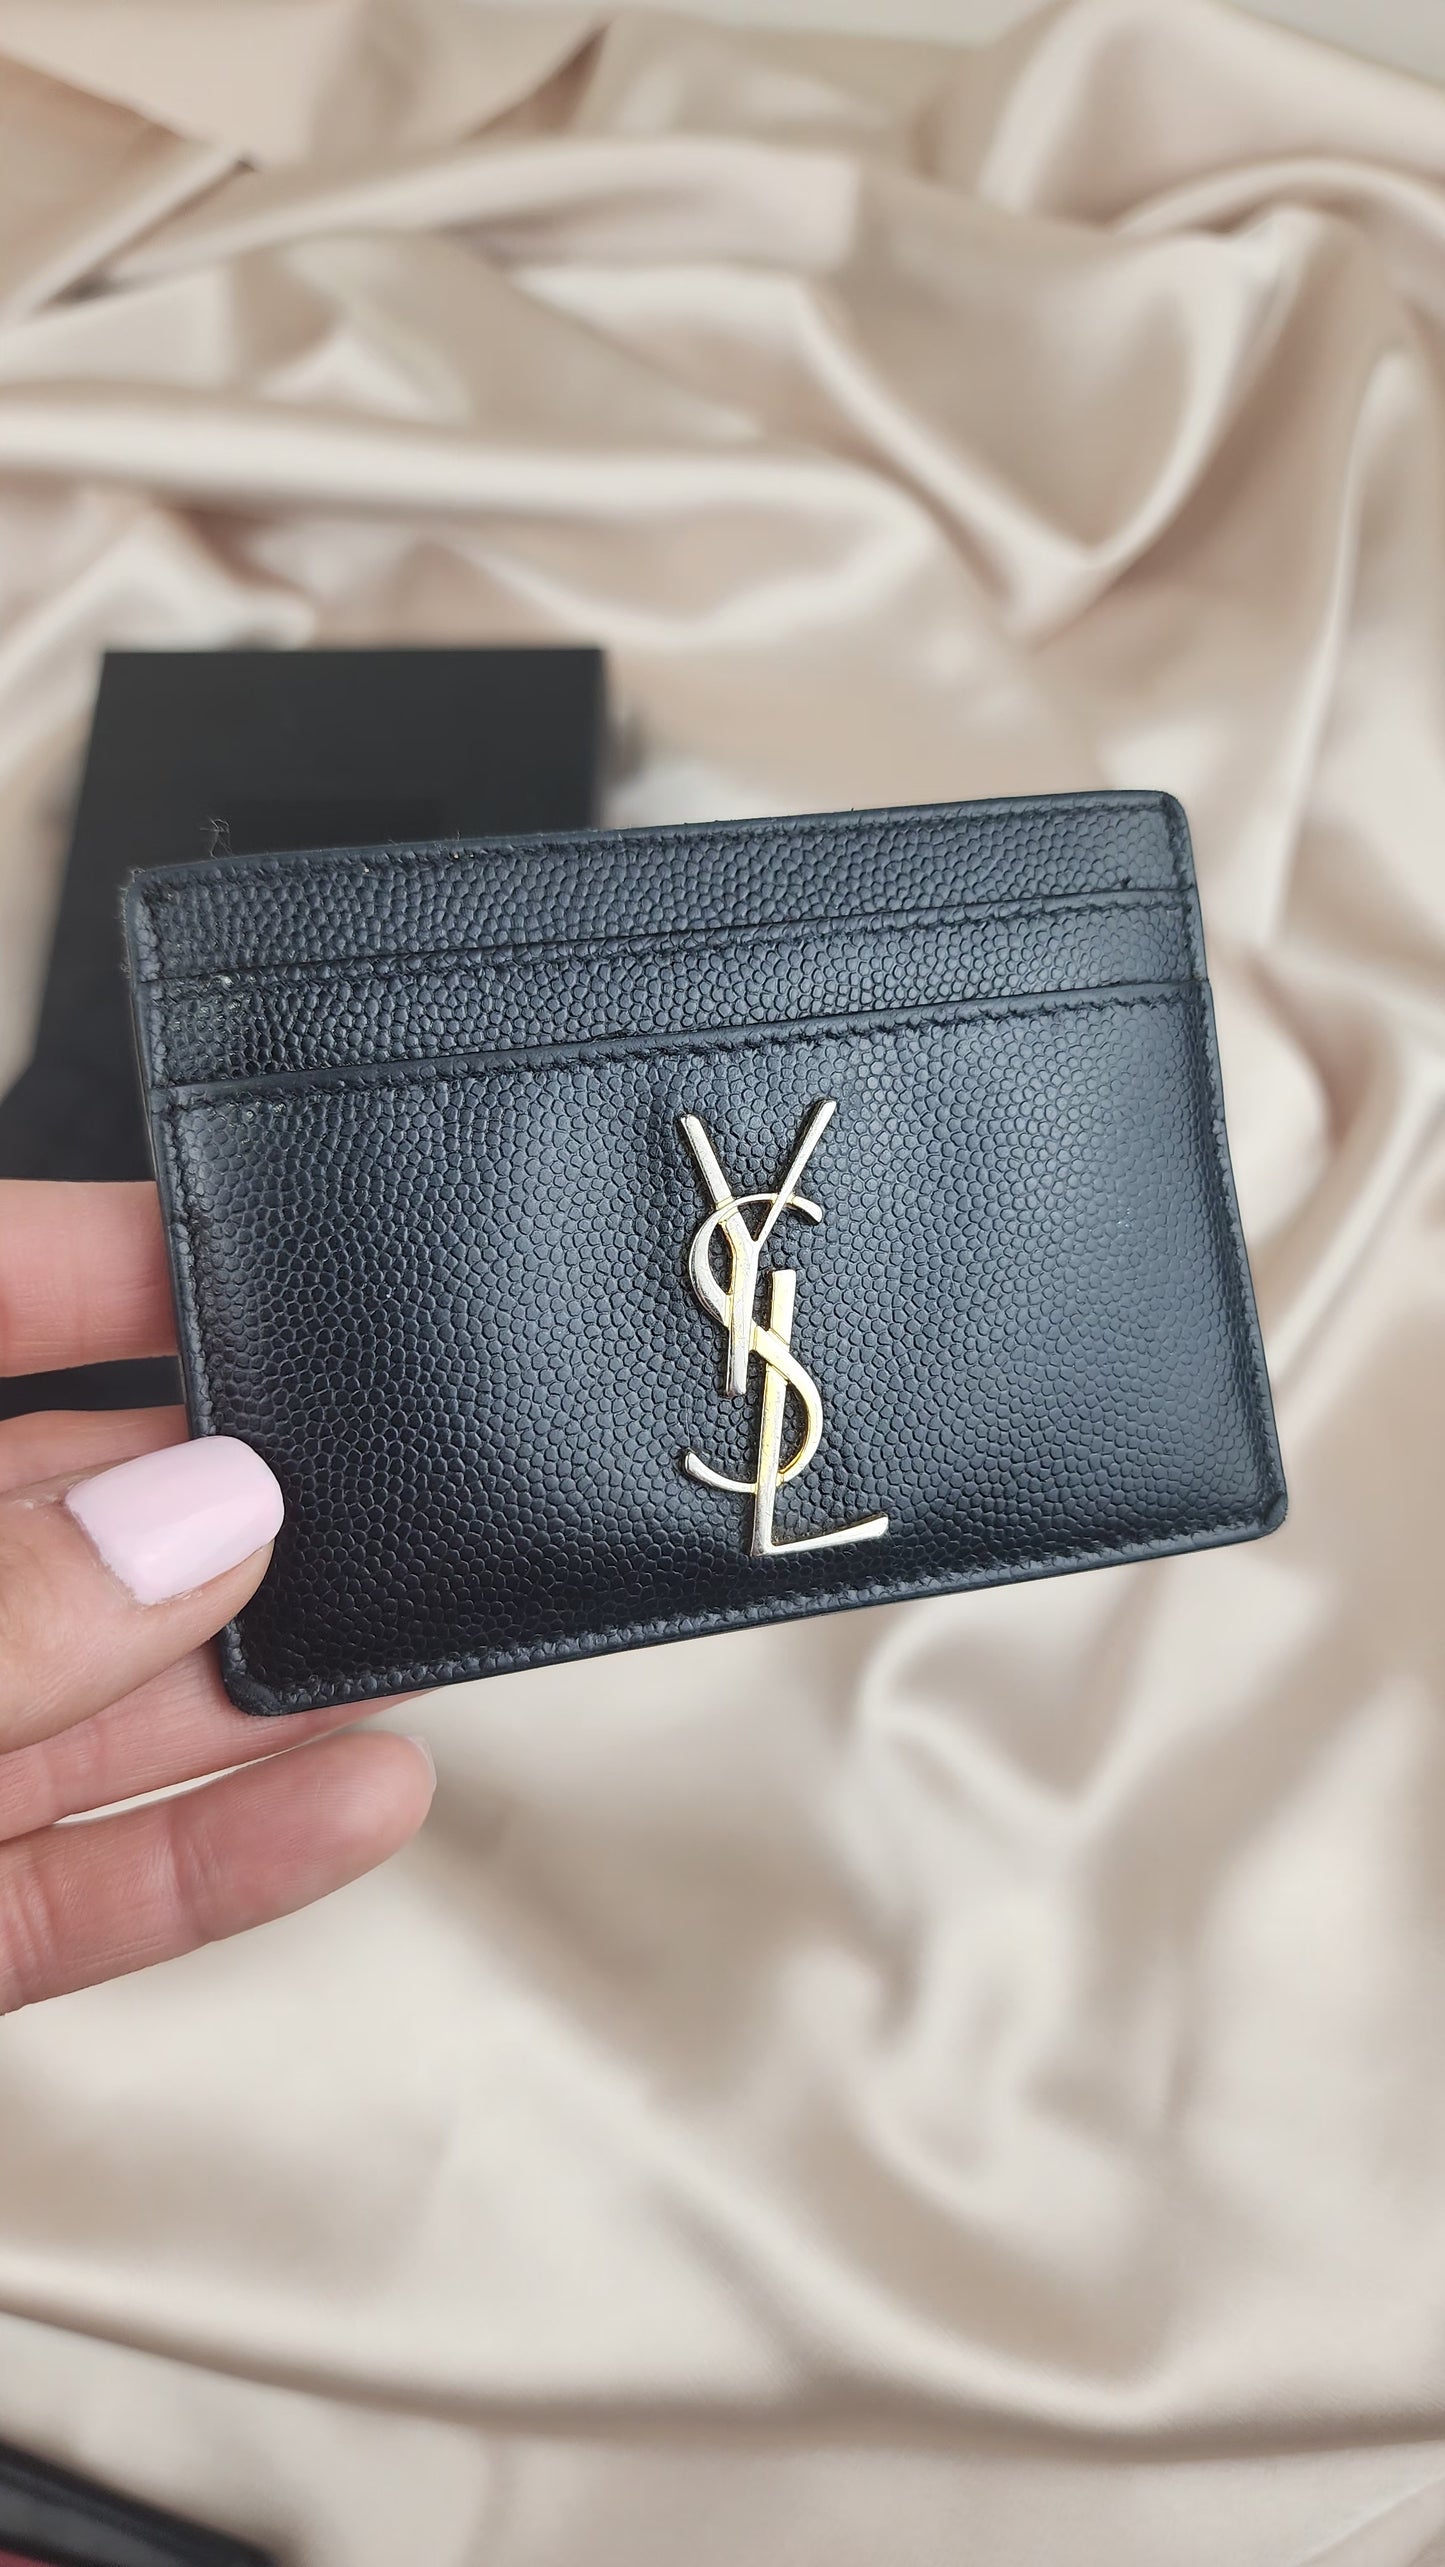 YSL Leather Card Holder - full inclusion